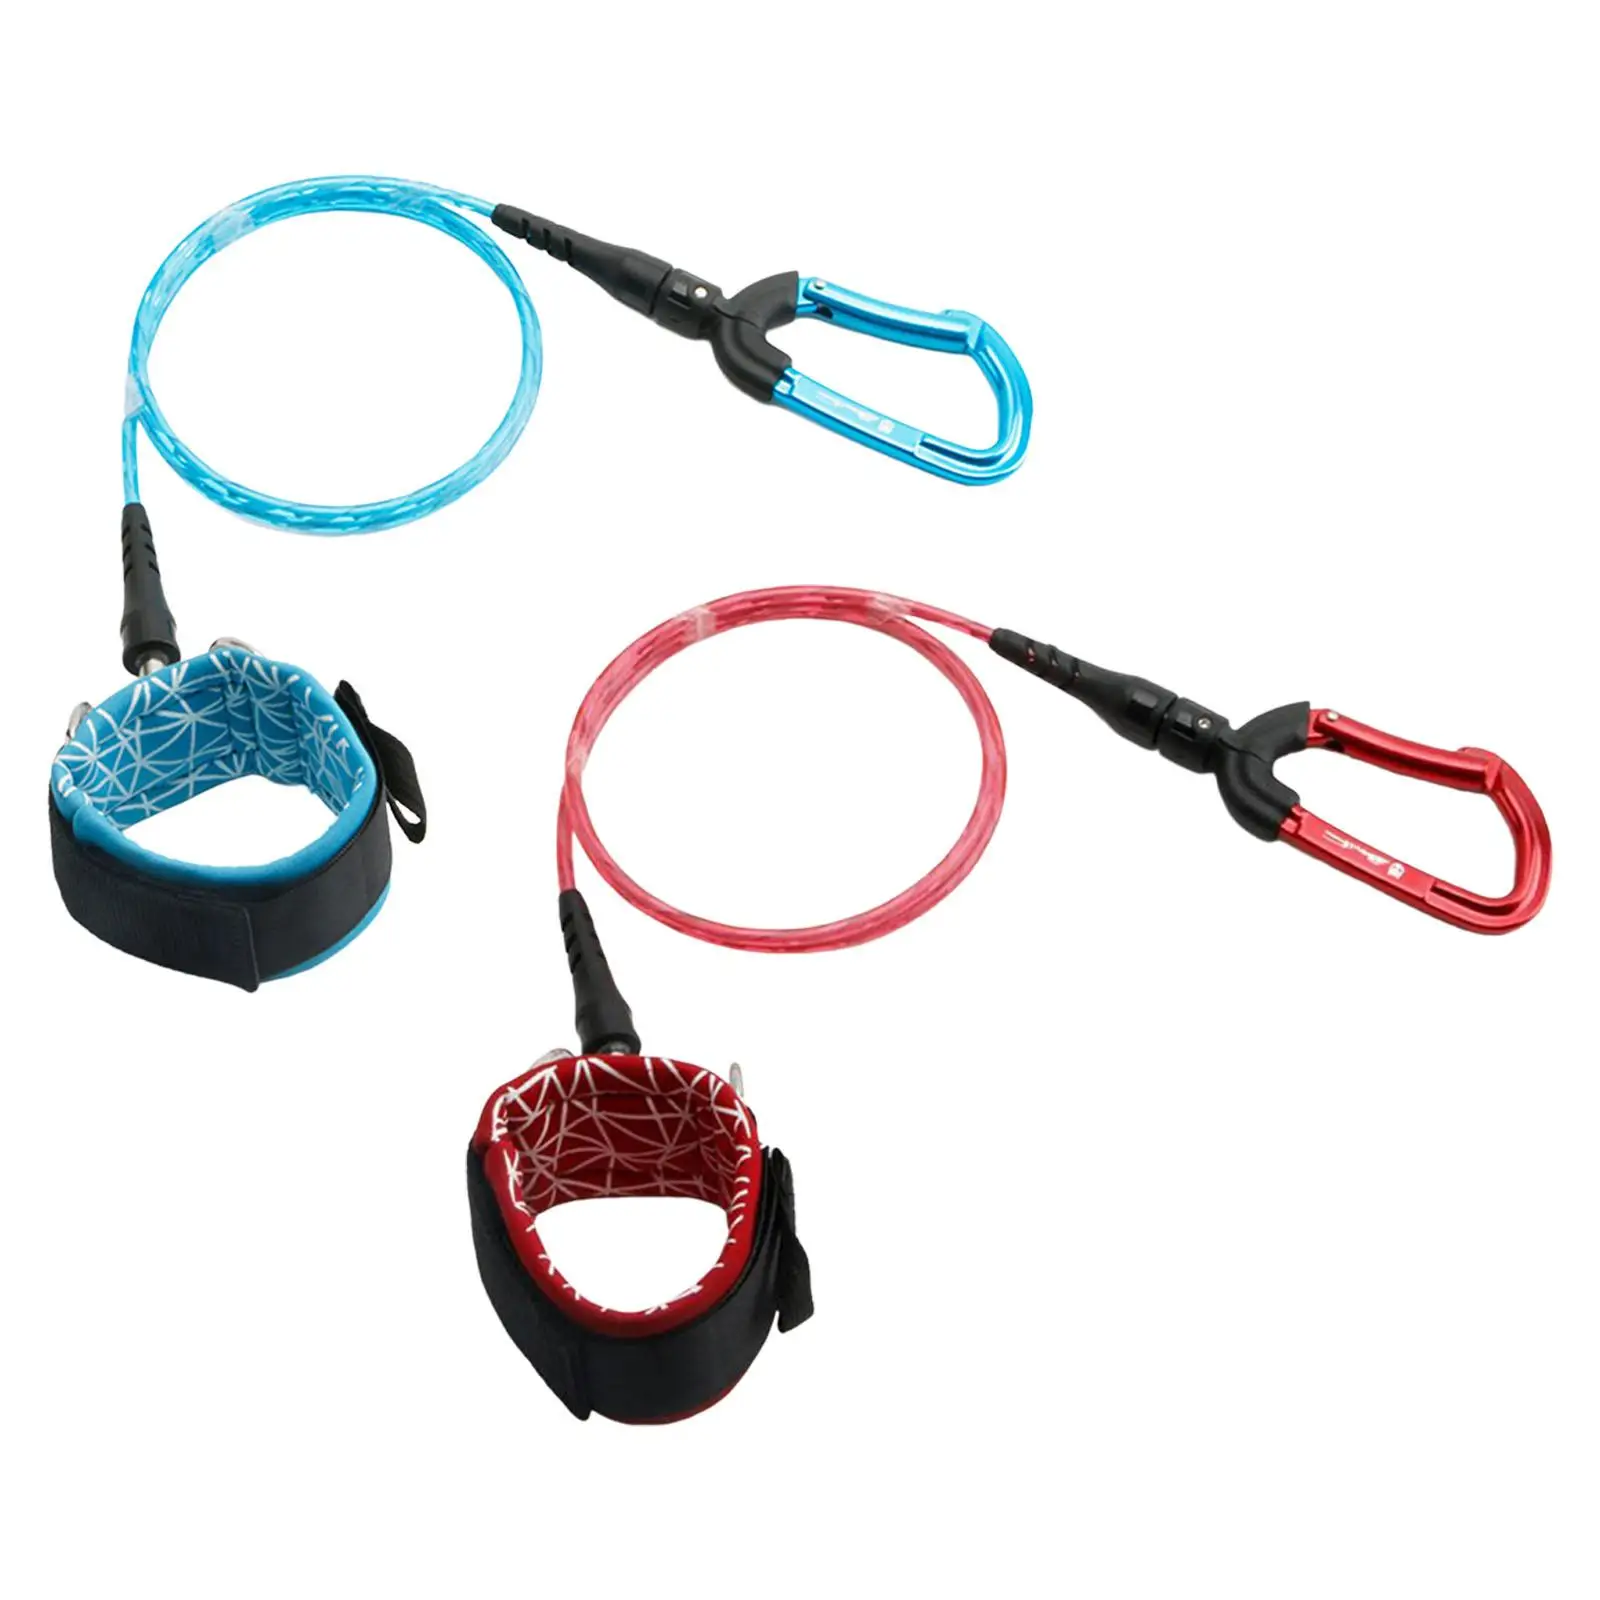 Freediving Lanyard with Comfortable Stainless Steel Professional Dive Wristband Safety Rope Fits for Scuba Diving